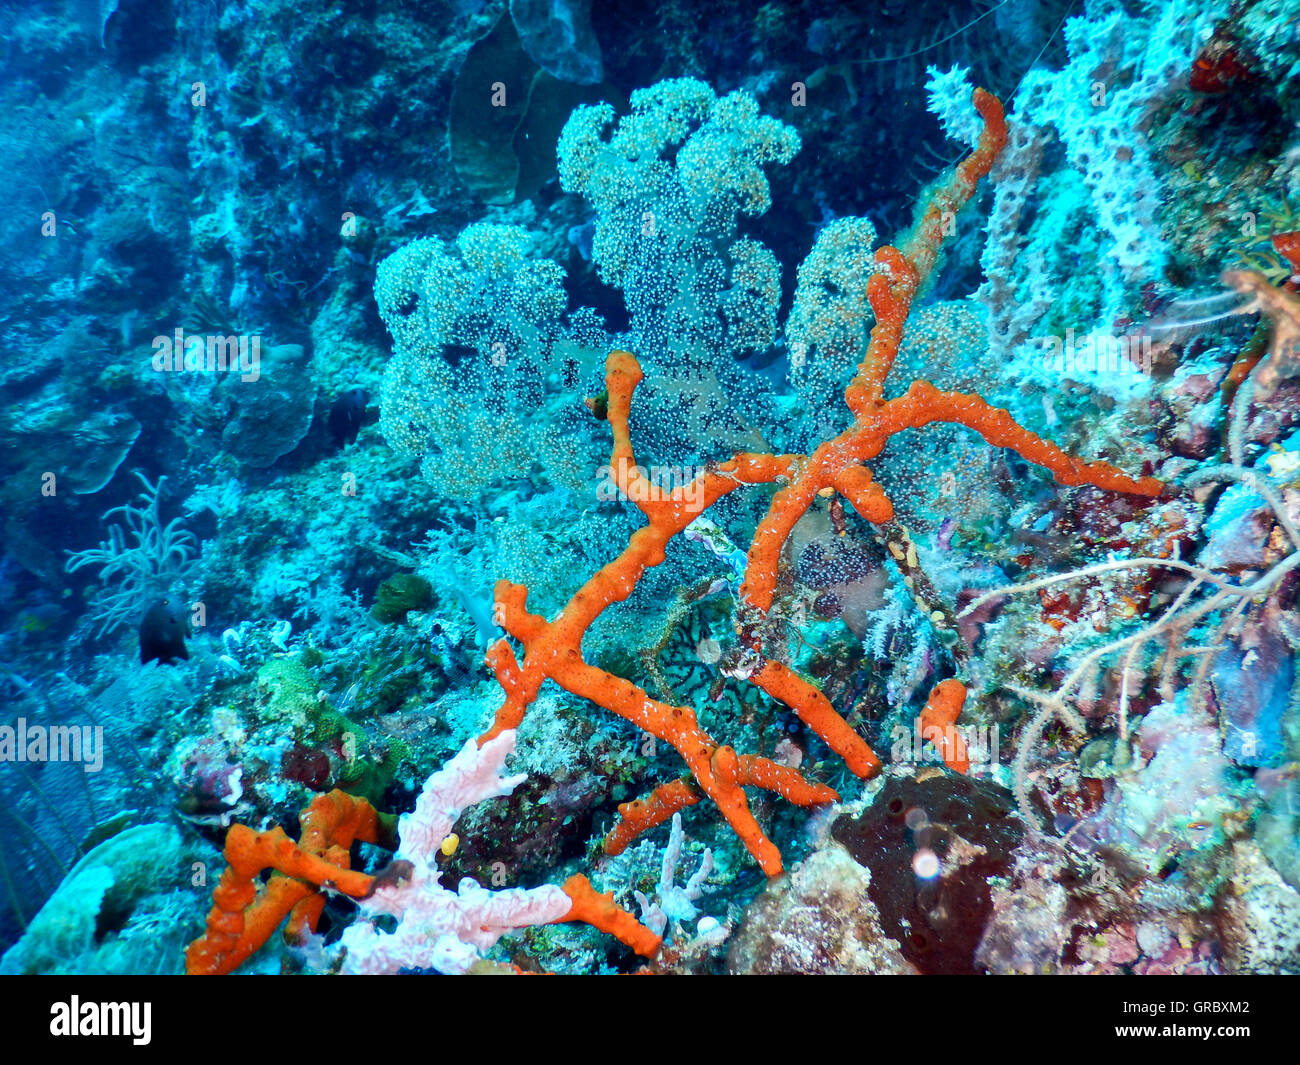 Orange Colored Sponge In Coral Reef, Soft Corals In The Back. Selayar, South Sulawesi, Indonesia Stock Photo